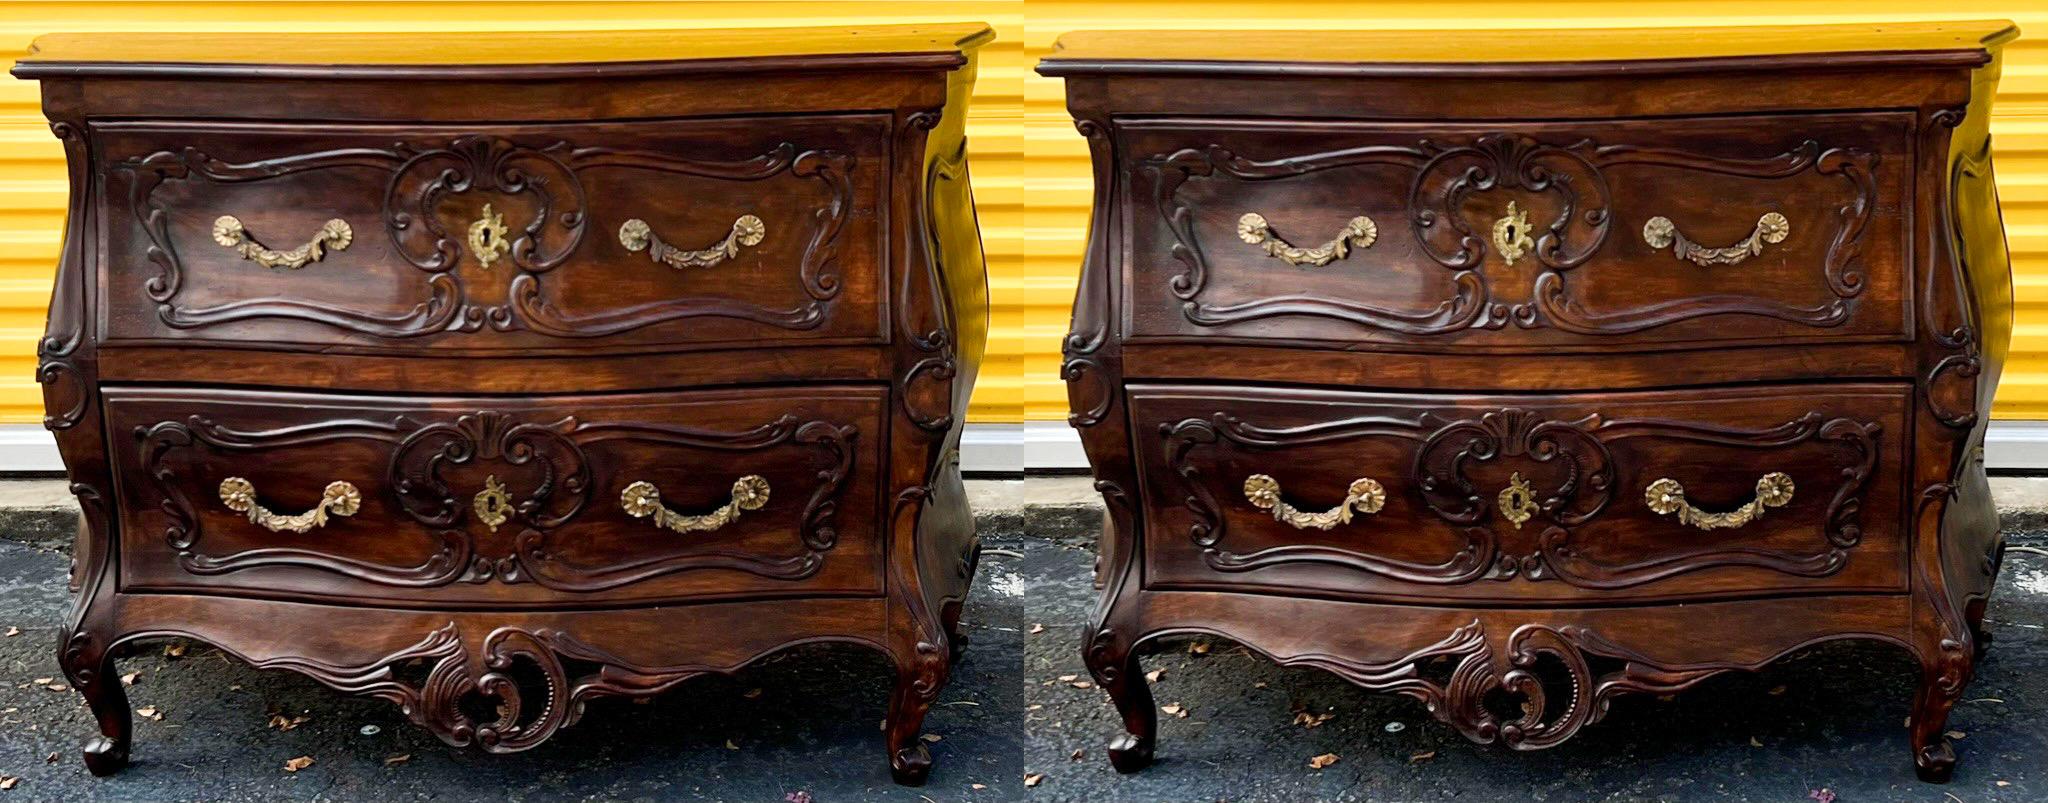 This is a lovely pair of French Louis XV carved oak serpentine commodes. They have elegant brass hardware and are in very good condition. I believe them to most likely date to the 50s. From foyer to bedroom, these have timeless appeal.

My shipping